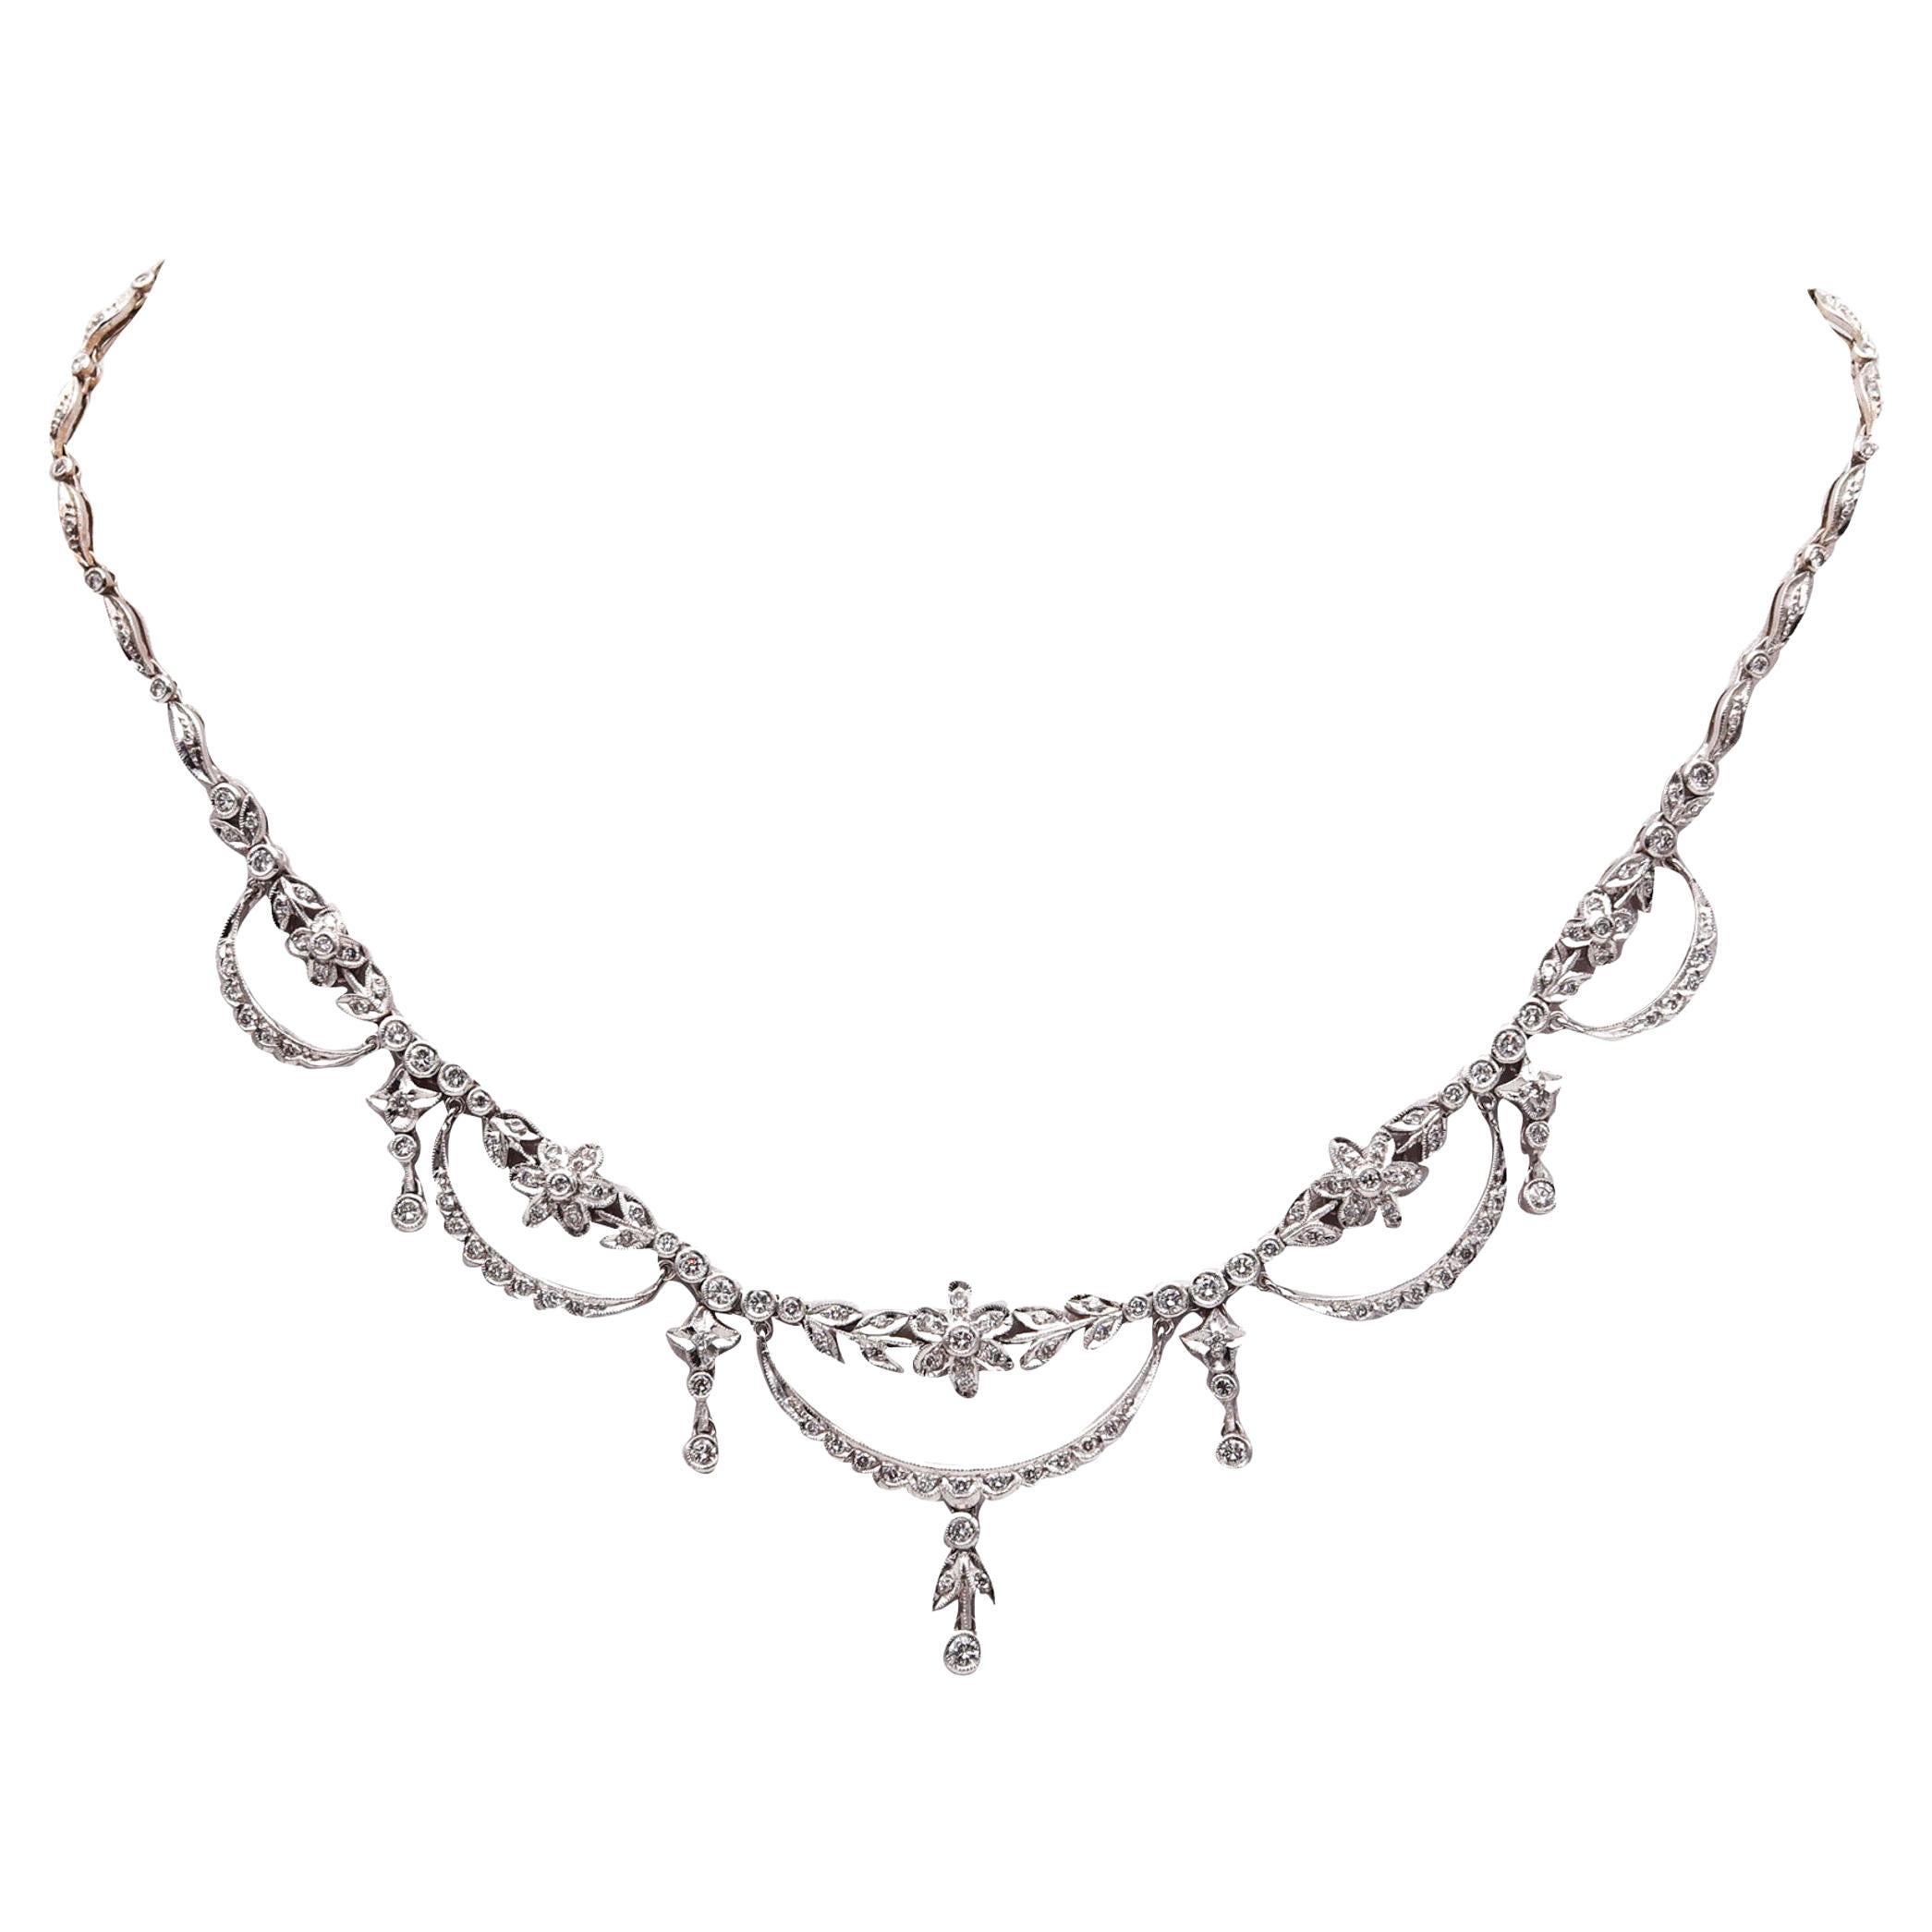 Edwardian 1910 Garlands Necklace In 18Kt White Gold With 3.72 Ctw In Diamonds For Sale